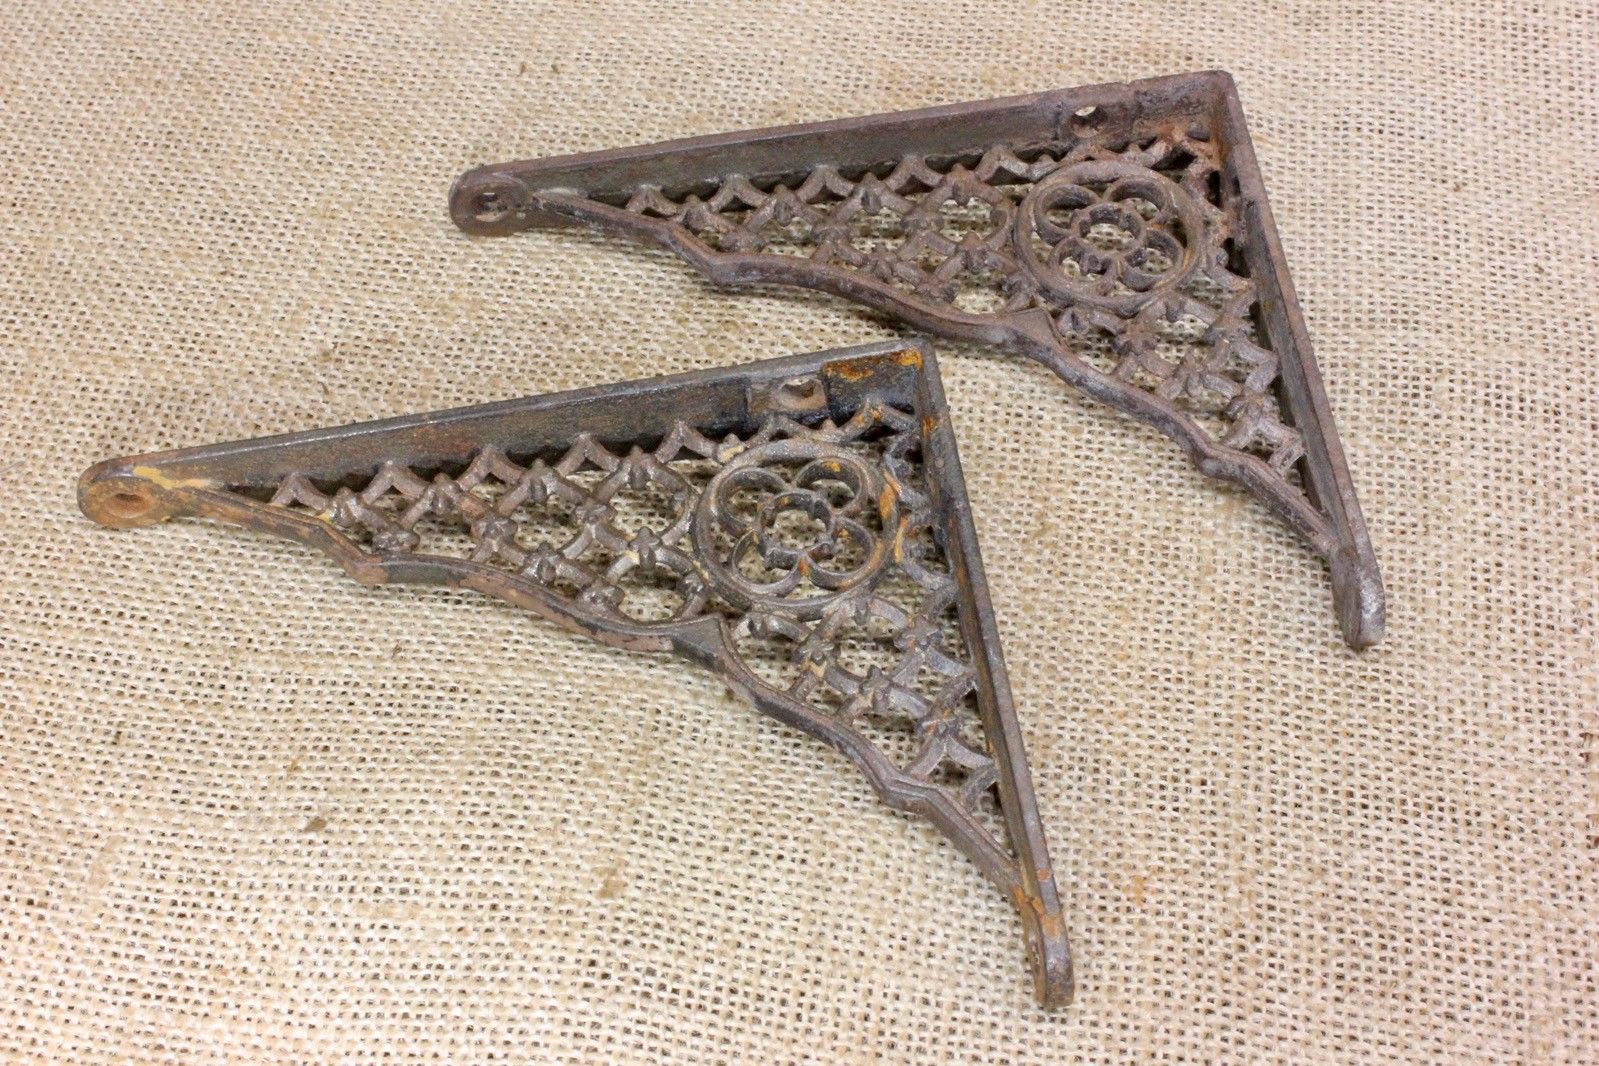 2 Shelf support Brackets 4 X 5” vintage 1800’s old rustic cast iron clover